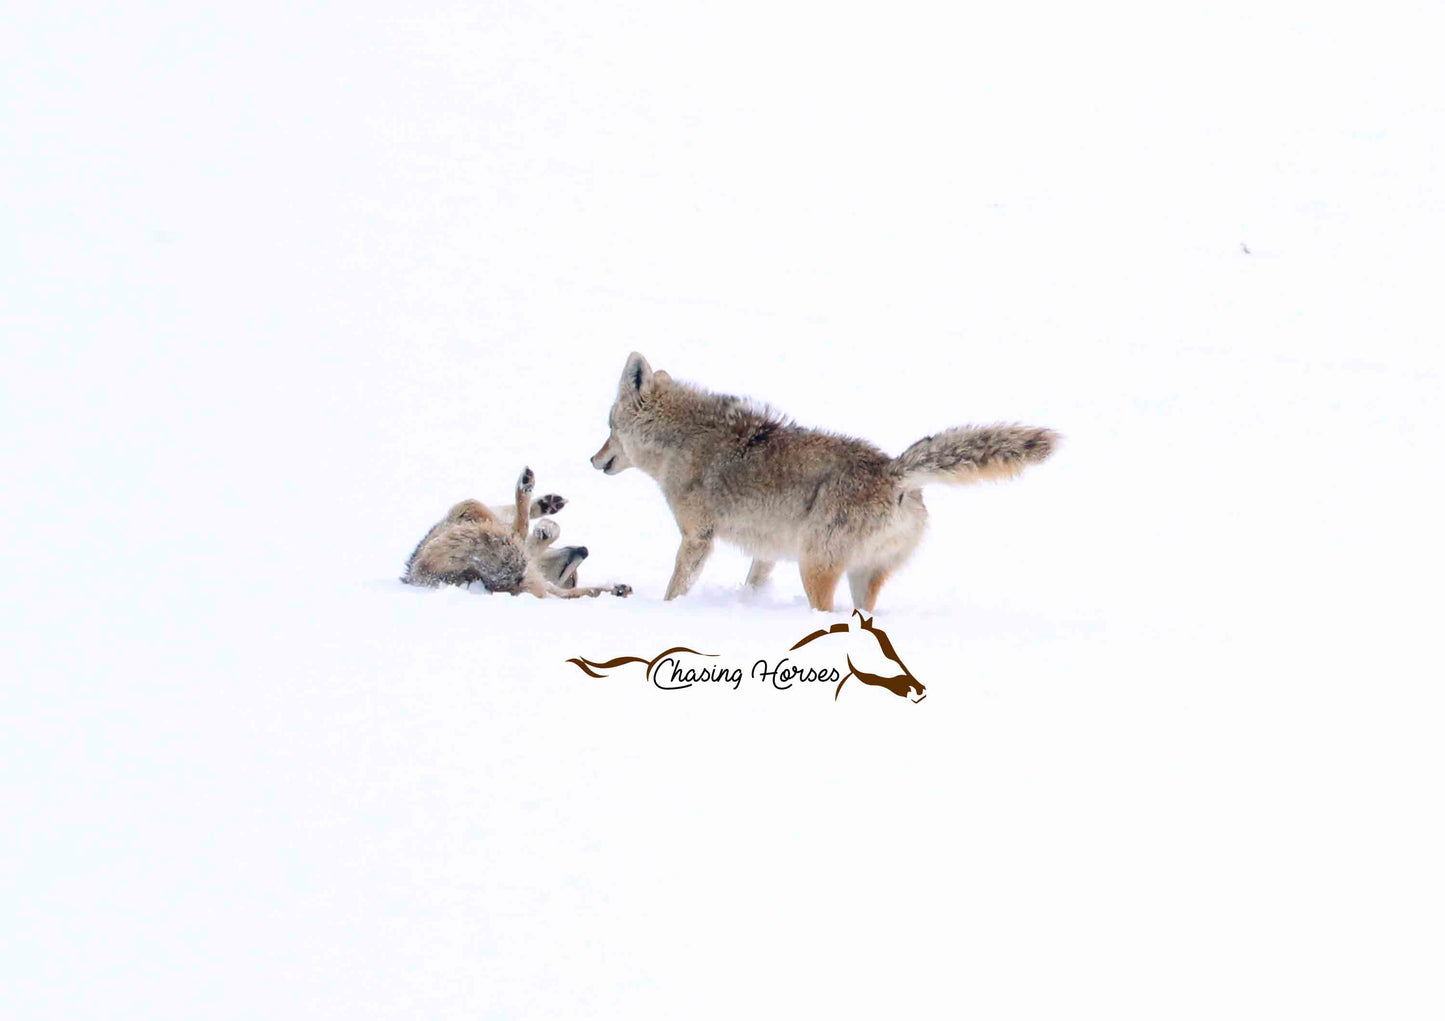 Coyotes in the snow 8x10 print